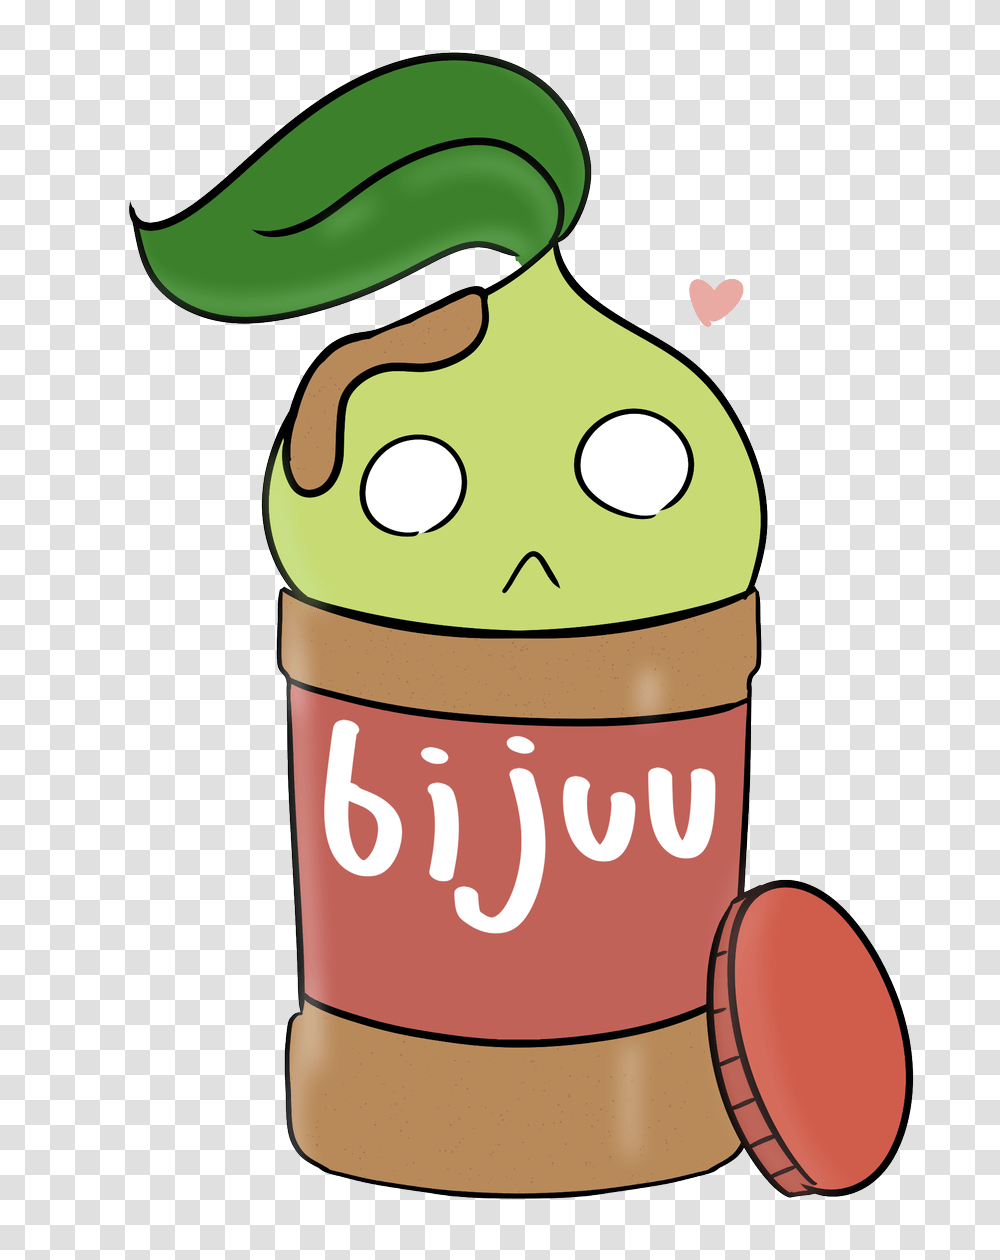 Giantmilkdud On Twitter Bijuu And The Peanut Butter, Food, Beverage, Drink, Ketchup Transparent Png